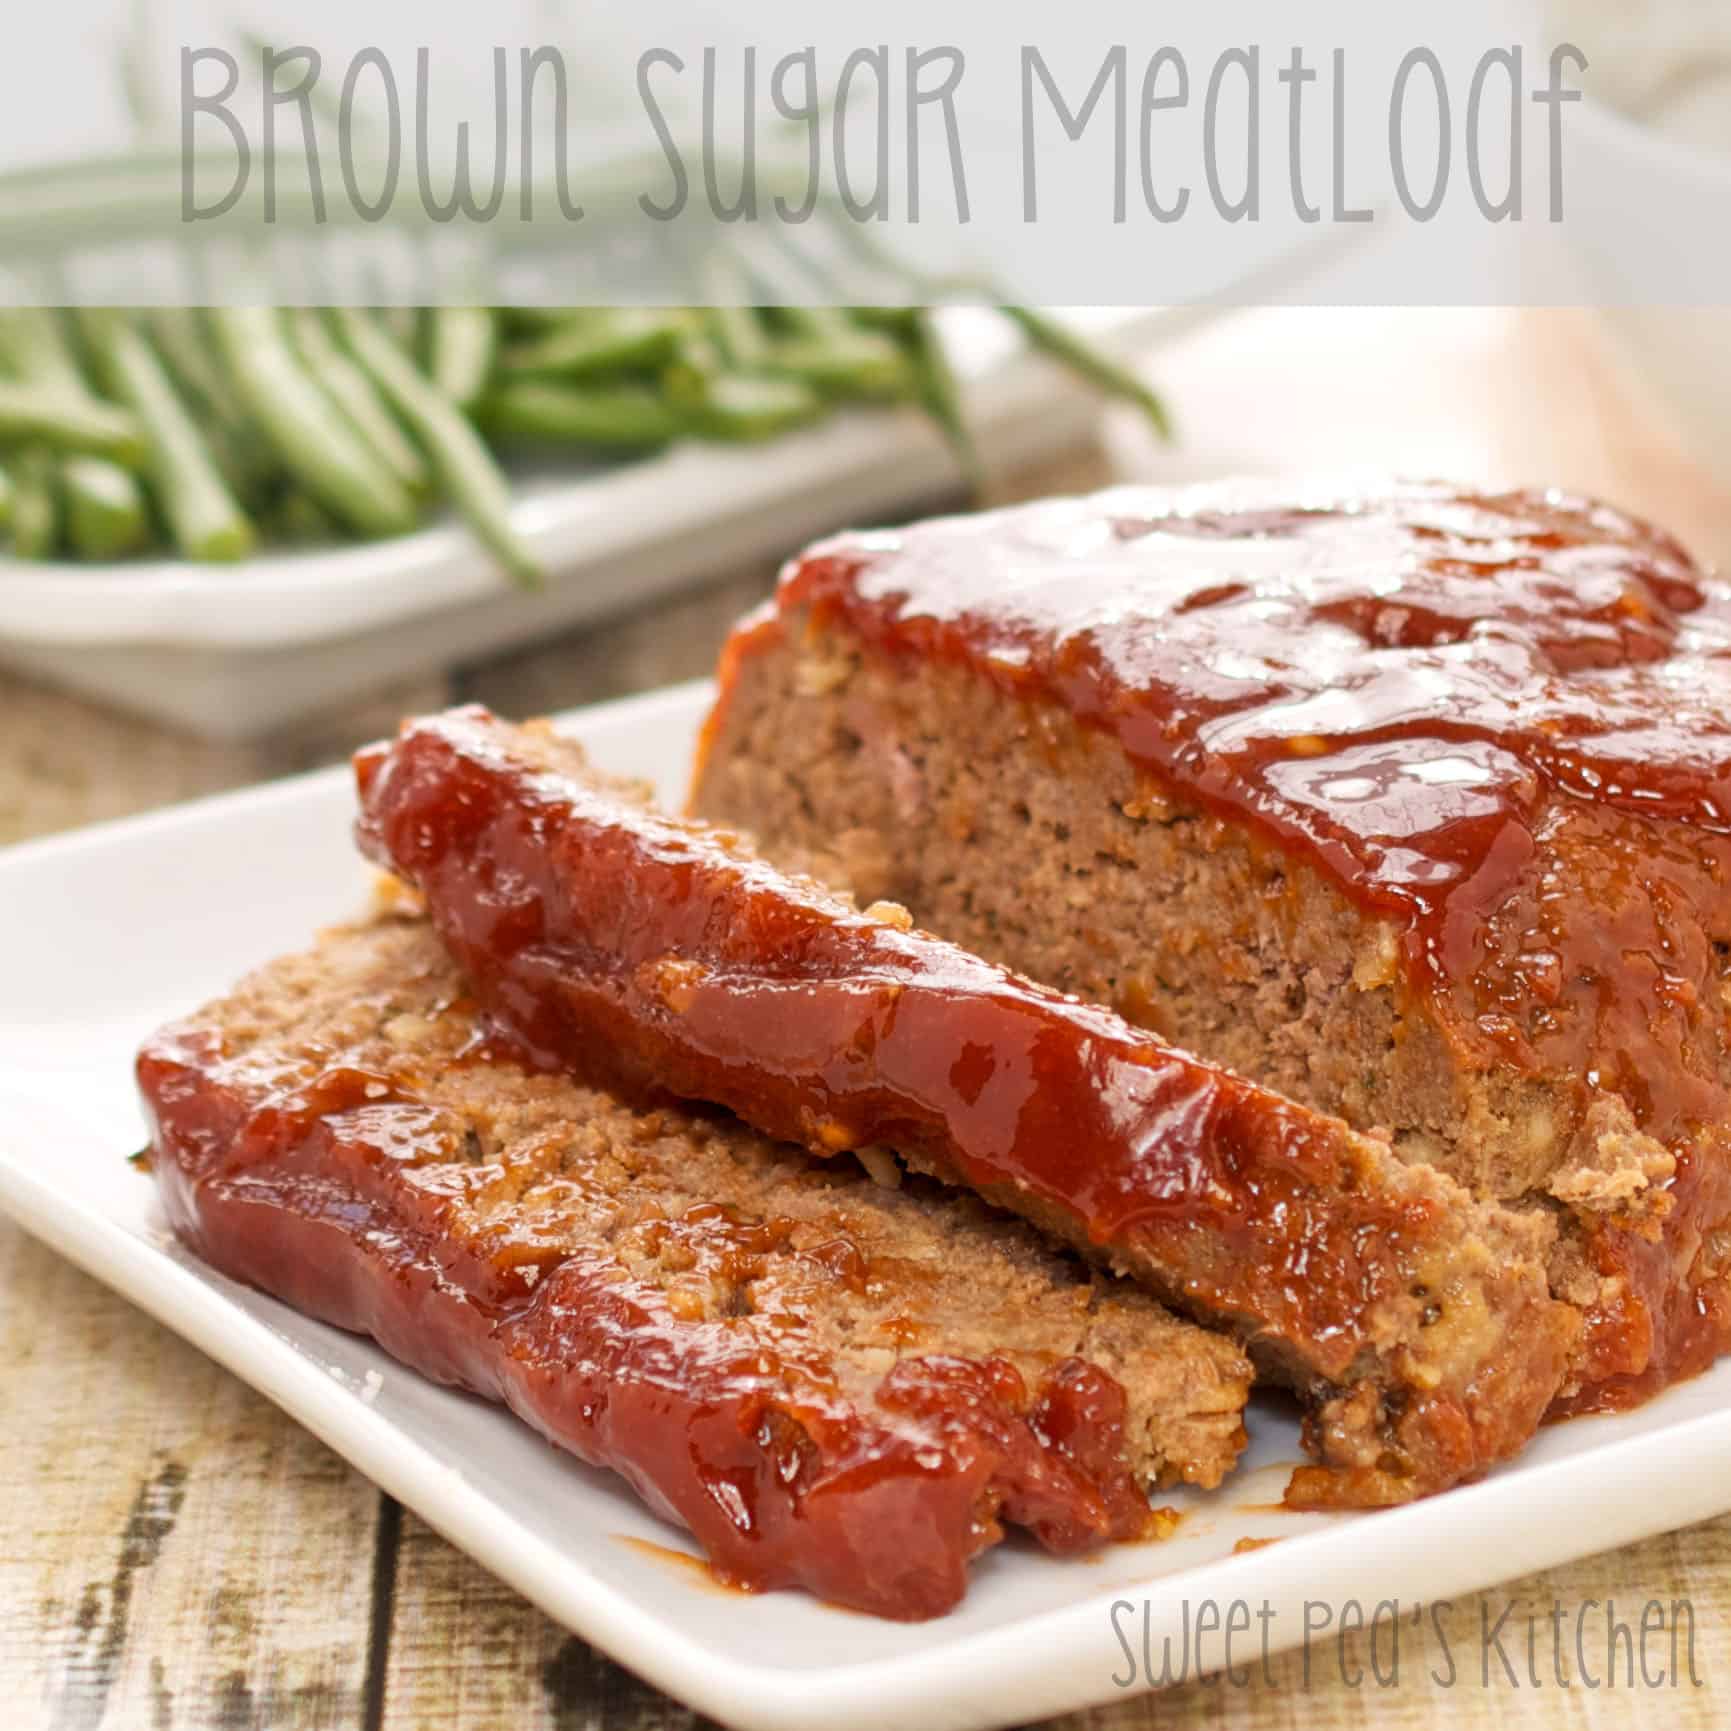 Easy Classic Brown Sugar Meatloaf - Sweet Pea's Kitchen